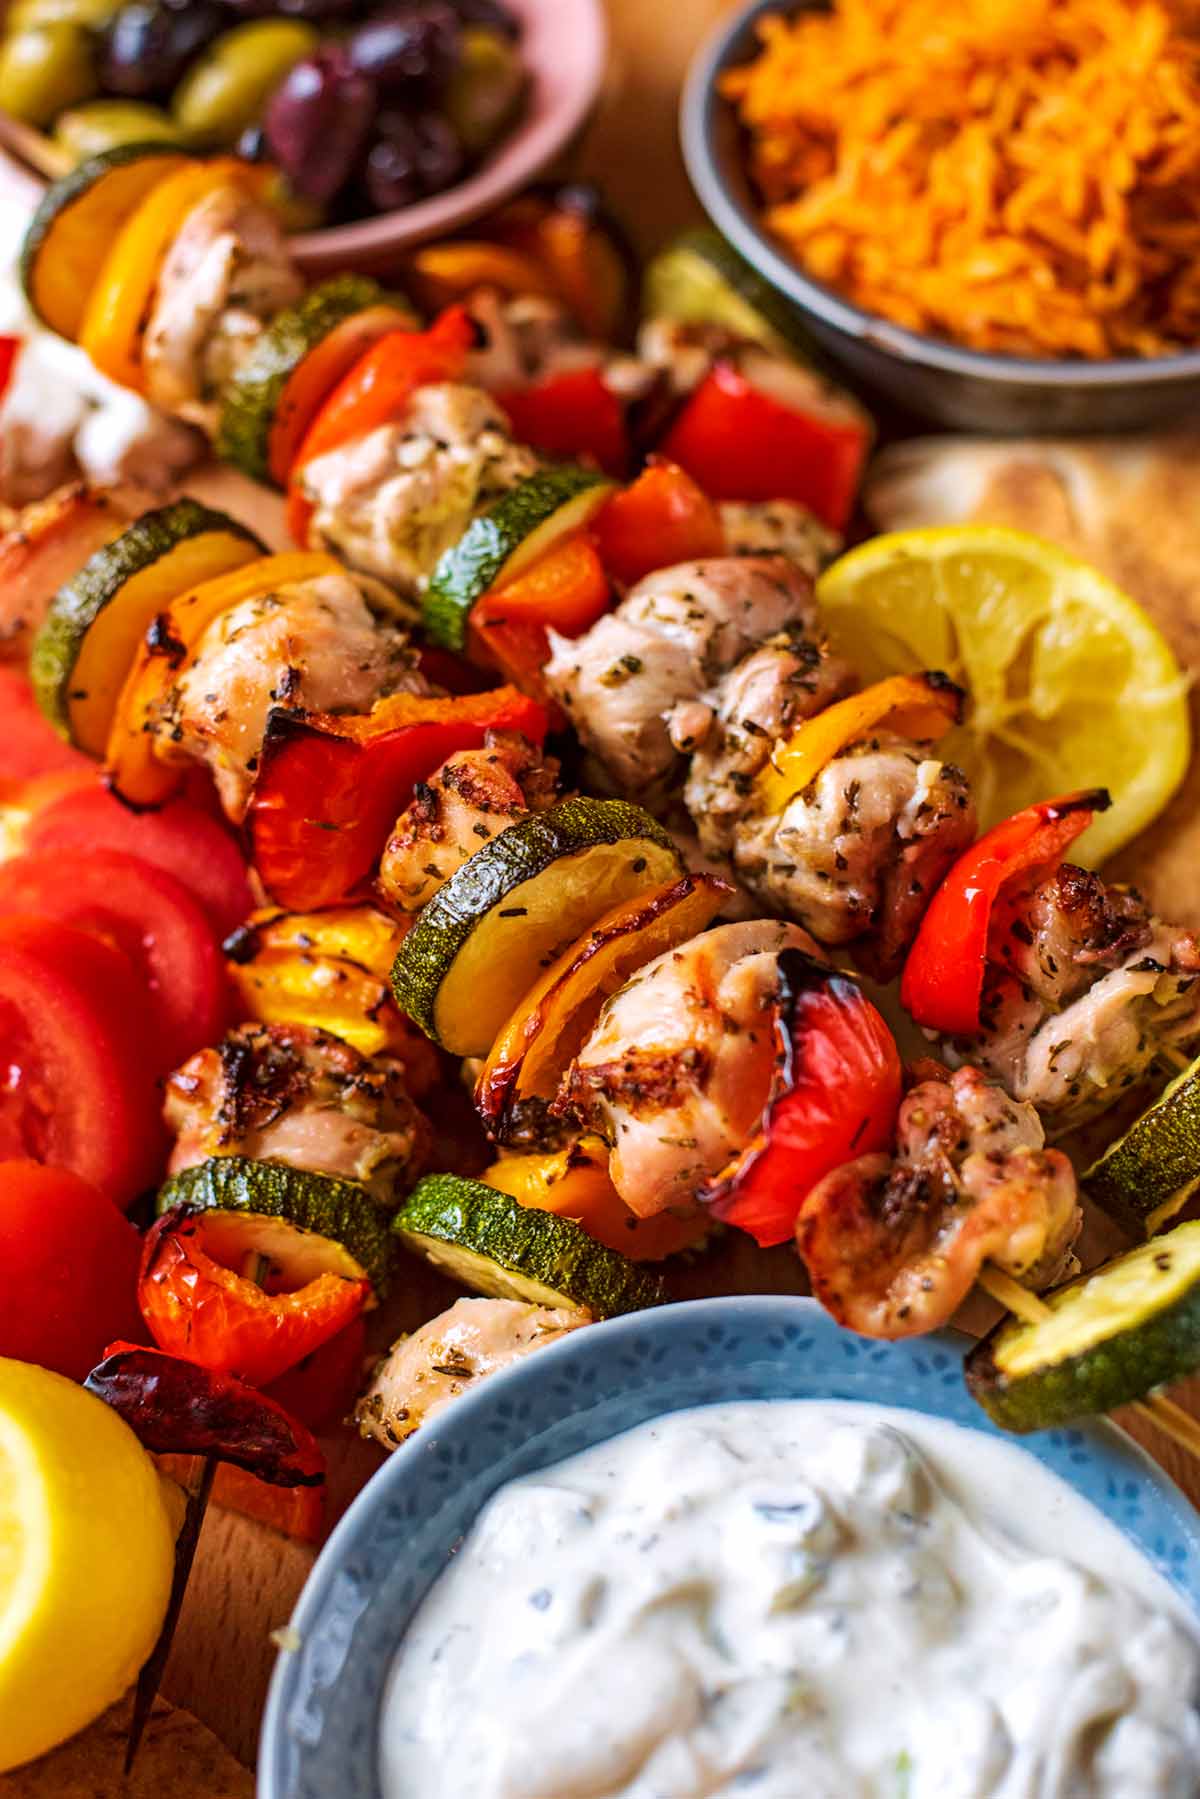 Chunks of cooked chicken and sliced vegetables together on skewers.